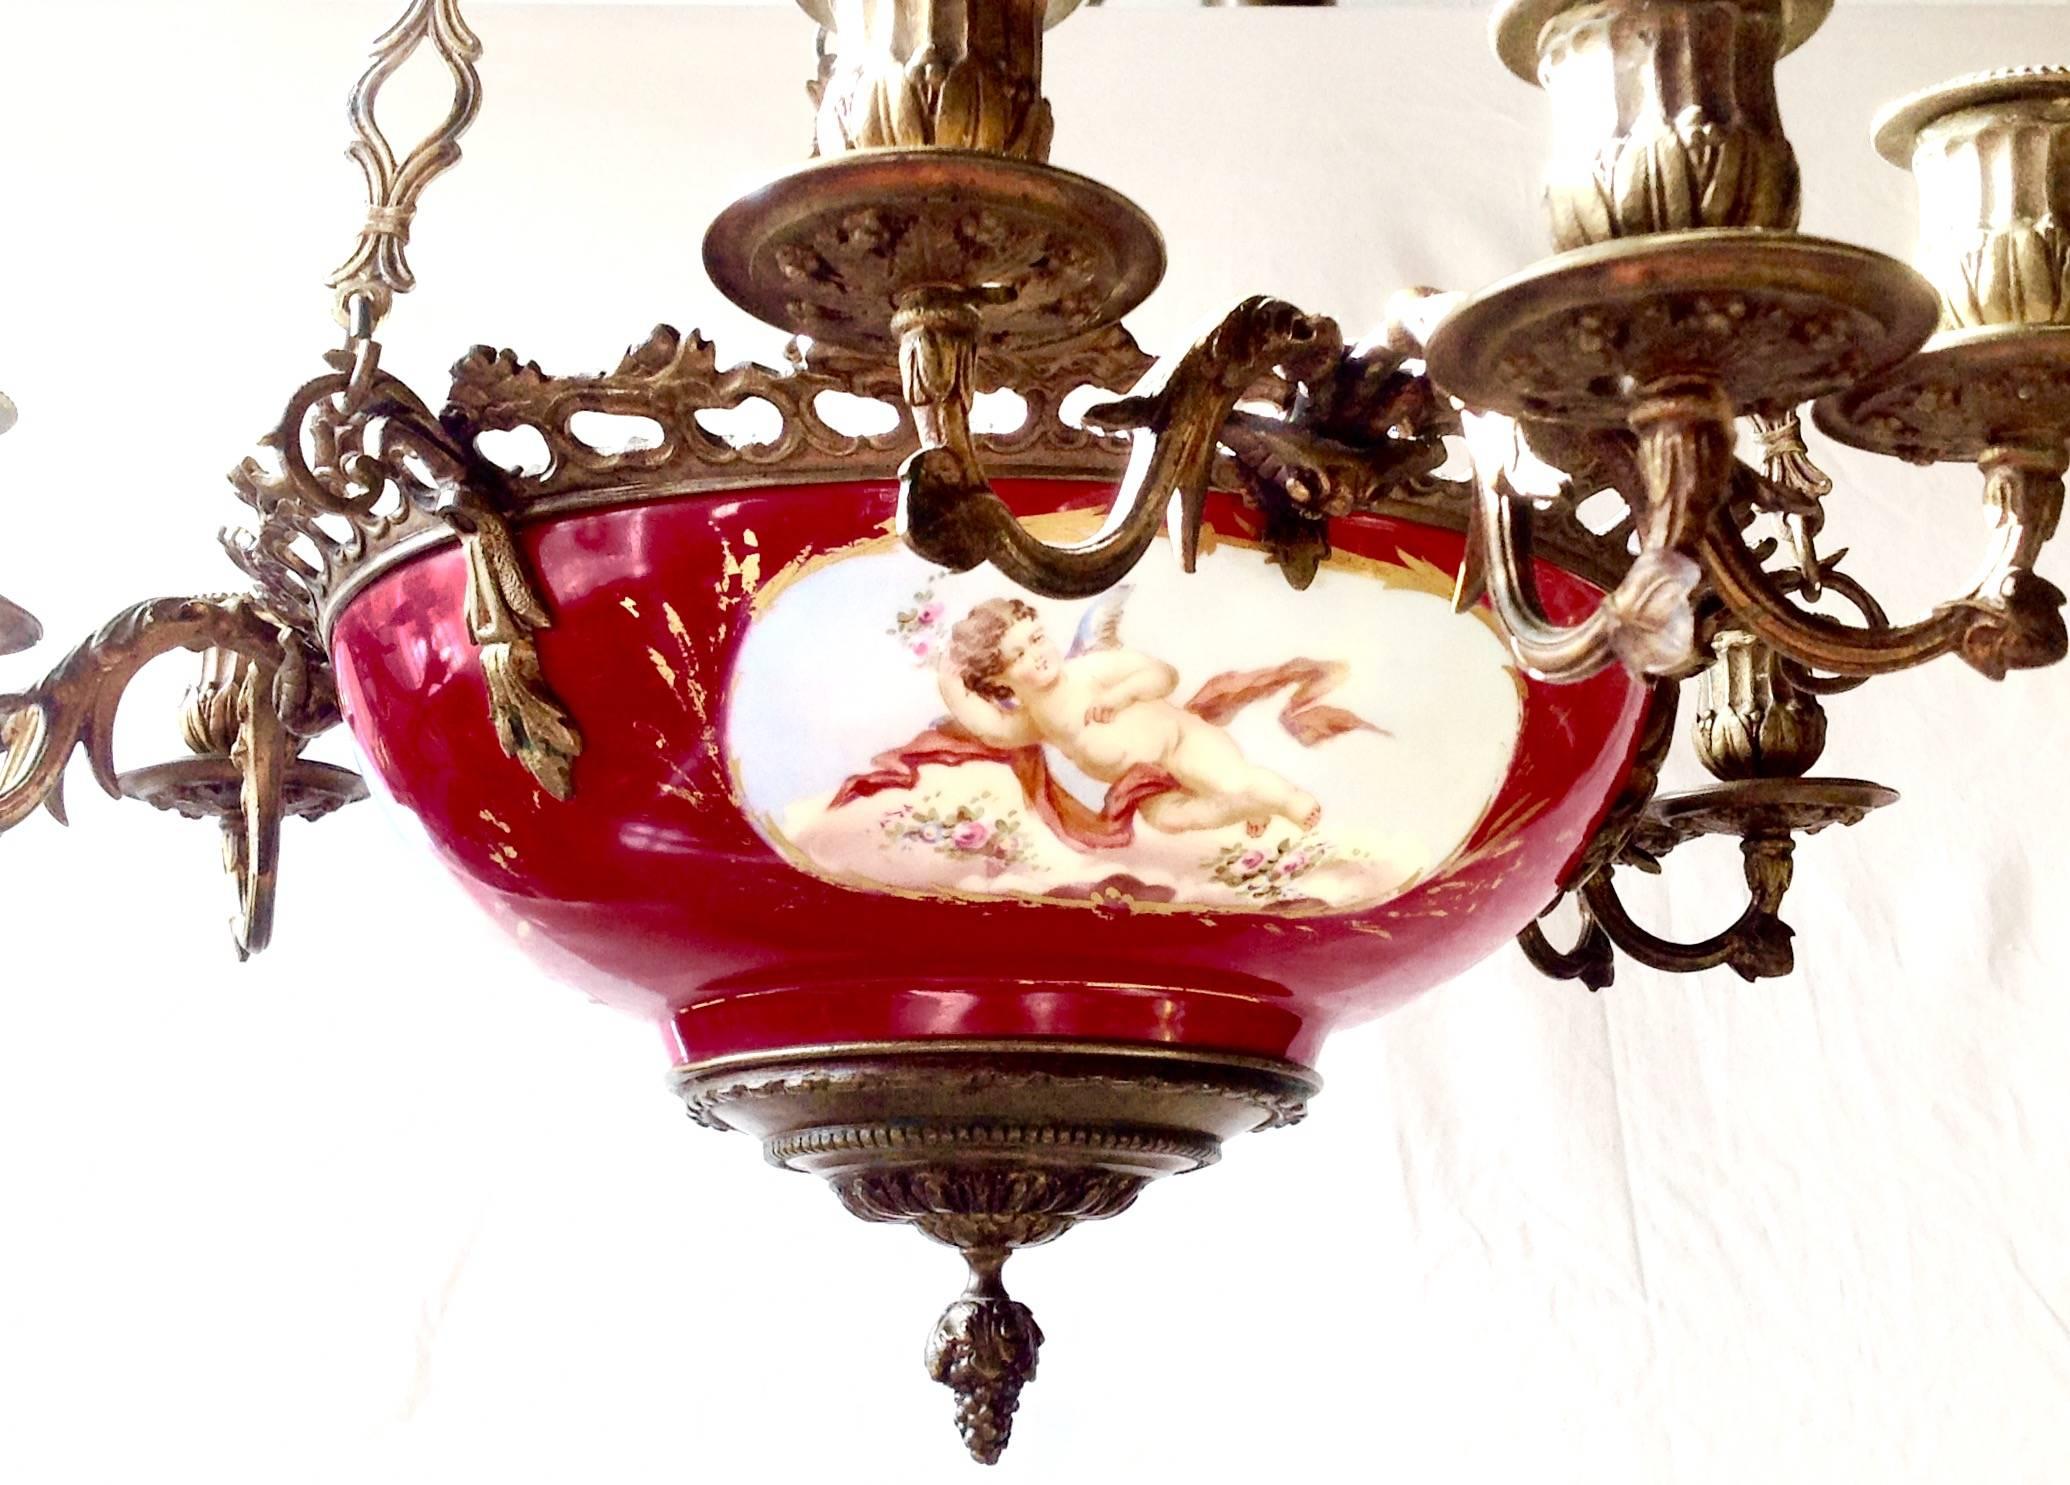 Early 1800s French Sèvres Porcelain Regency Empire Chandelier For Sale 1